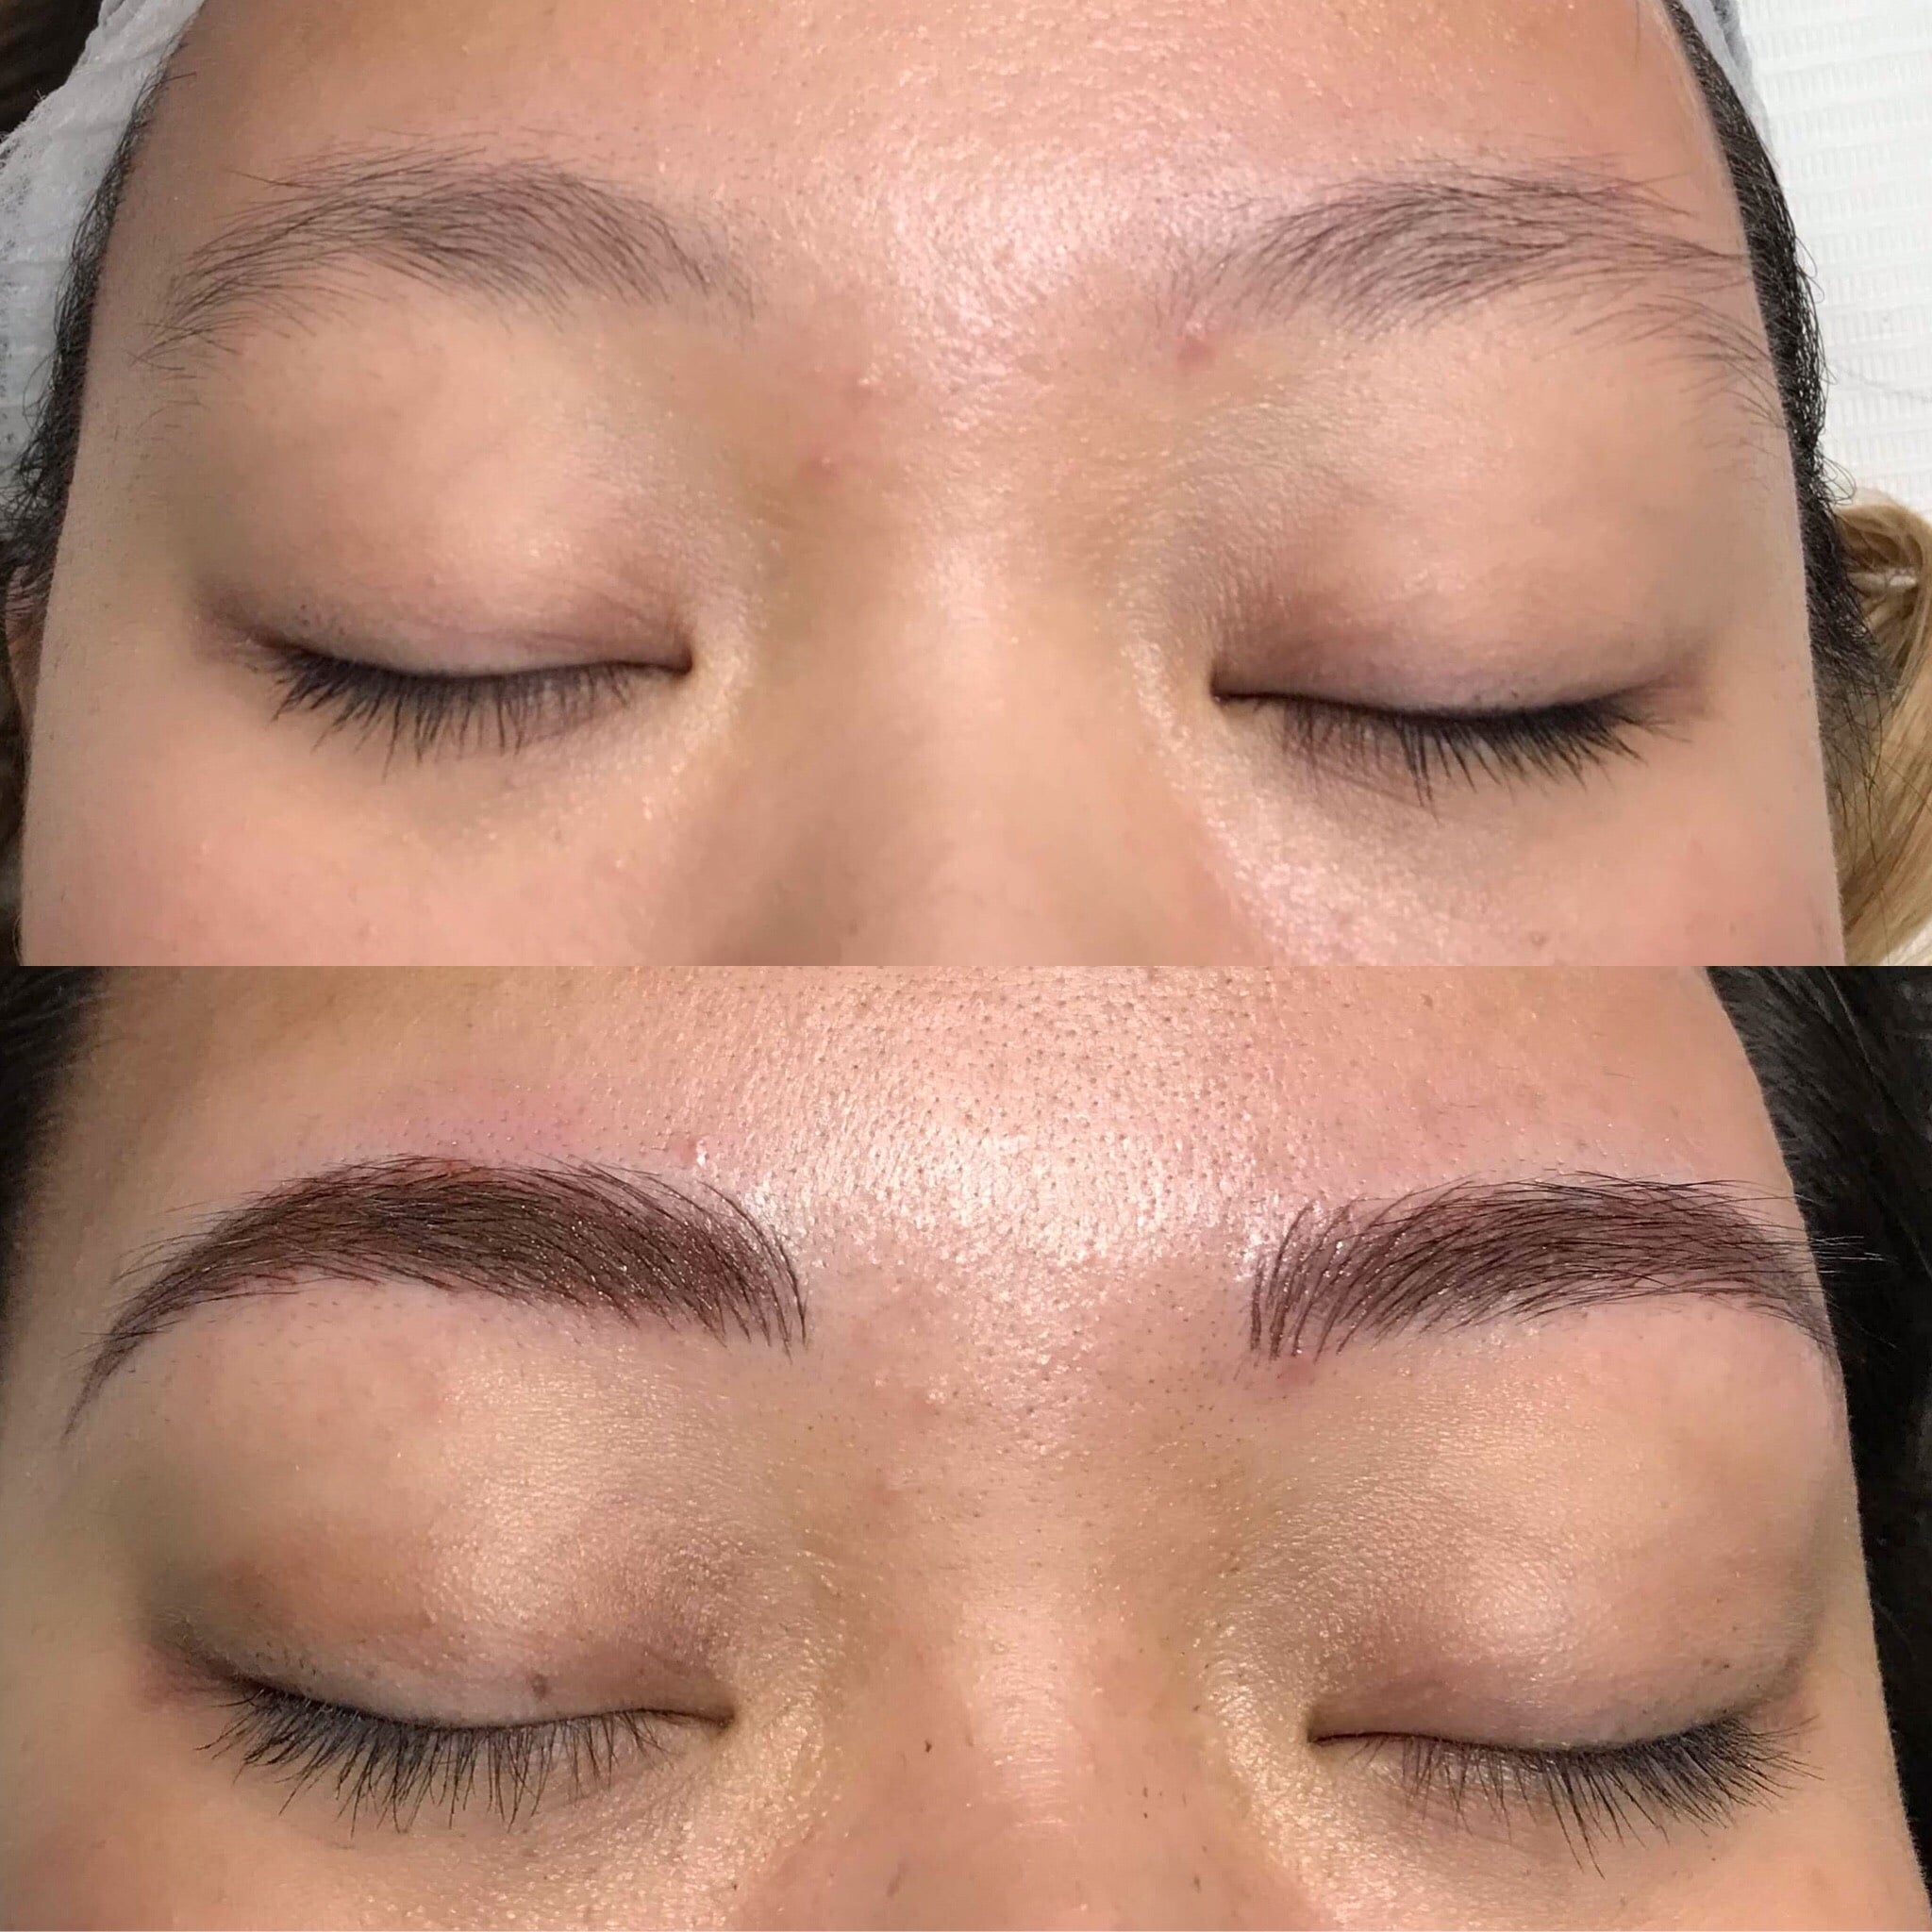 female patient’s eyebrows before and after microblading, eyebrows much fuller afterwards